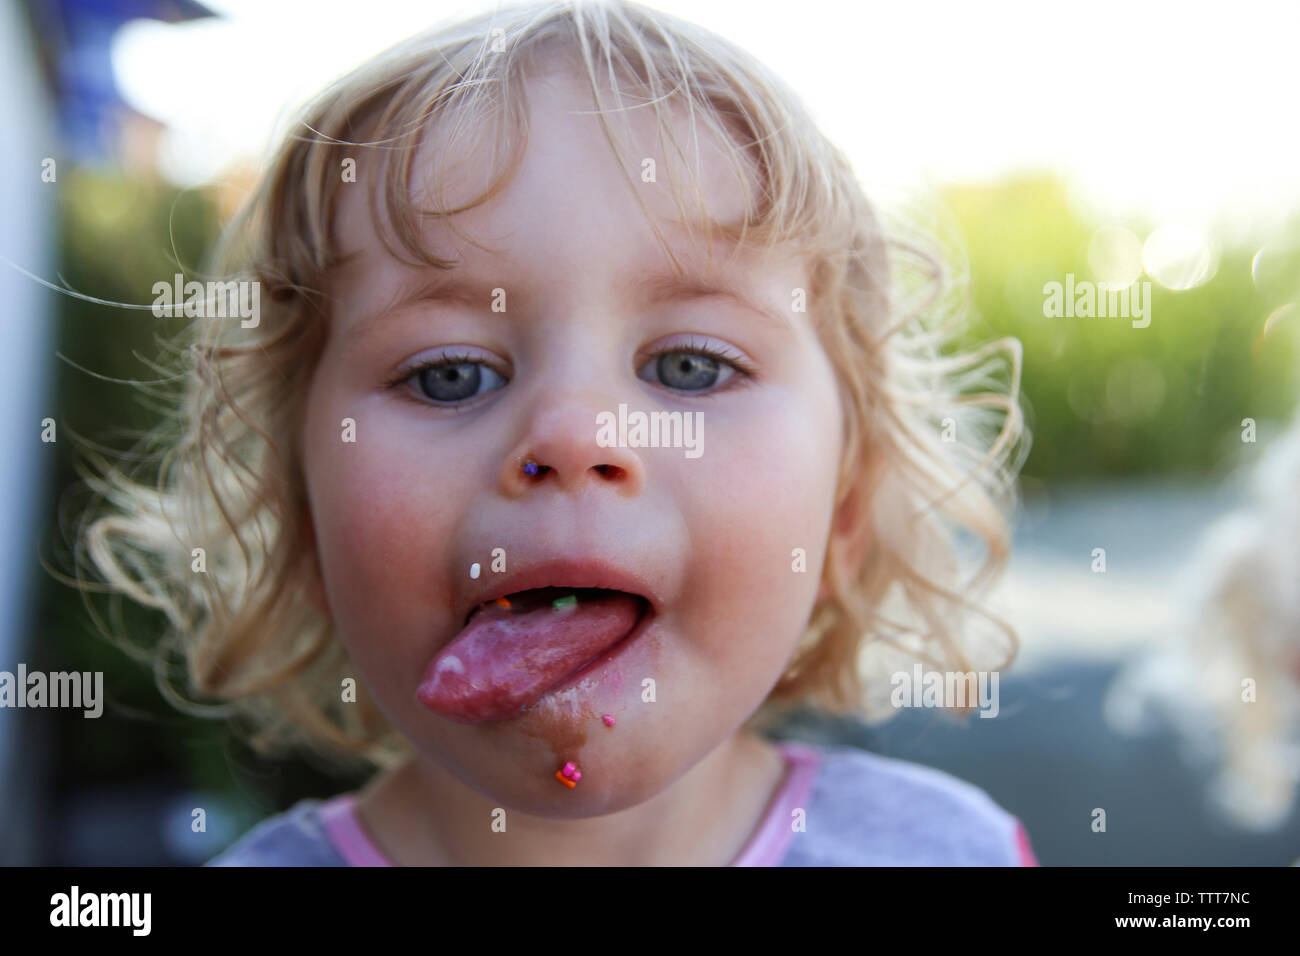 Close-up portrait of girl sticking out tongue Banque D'Images